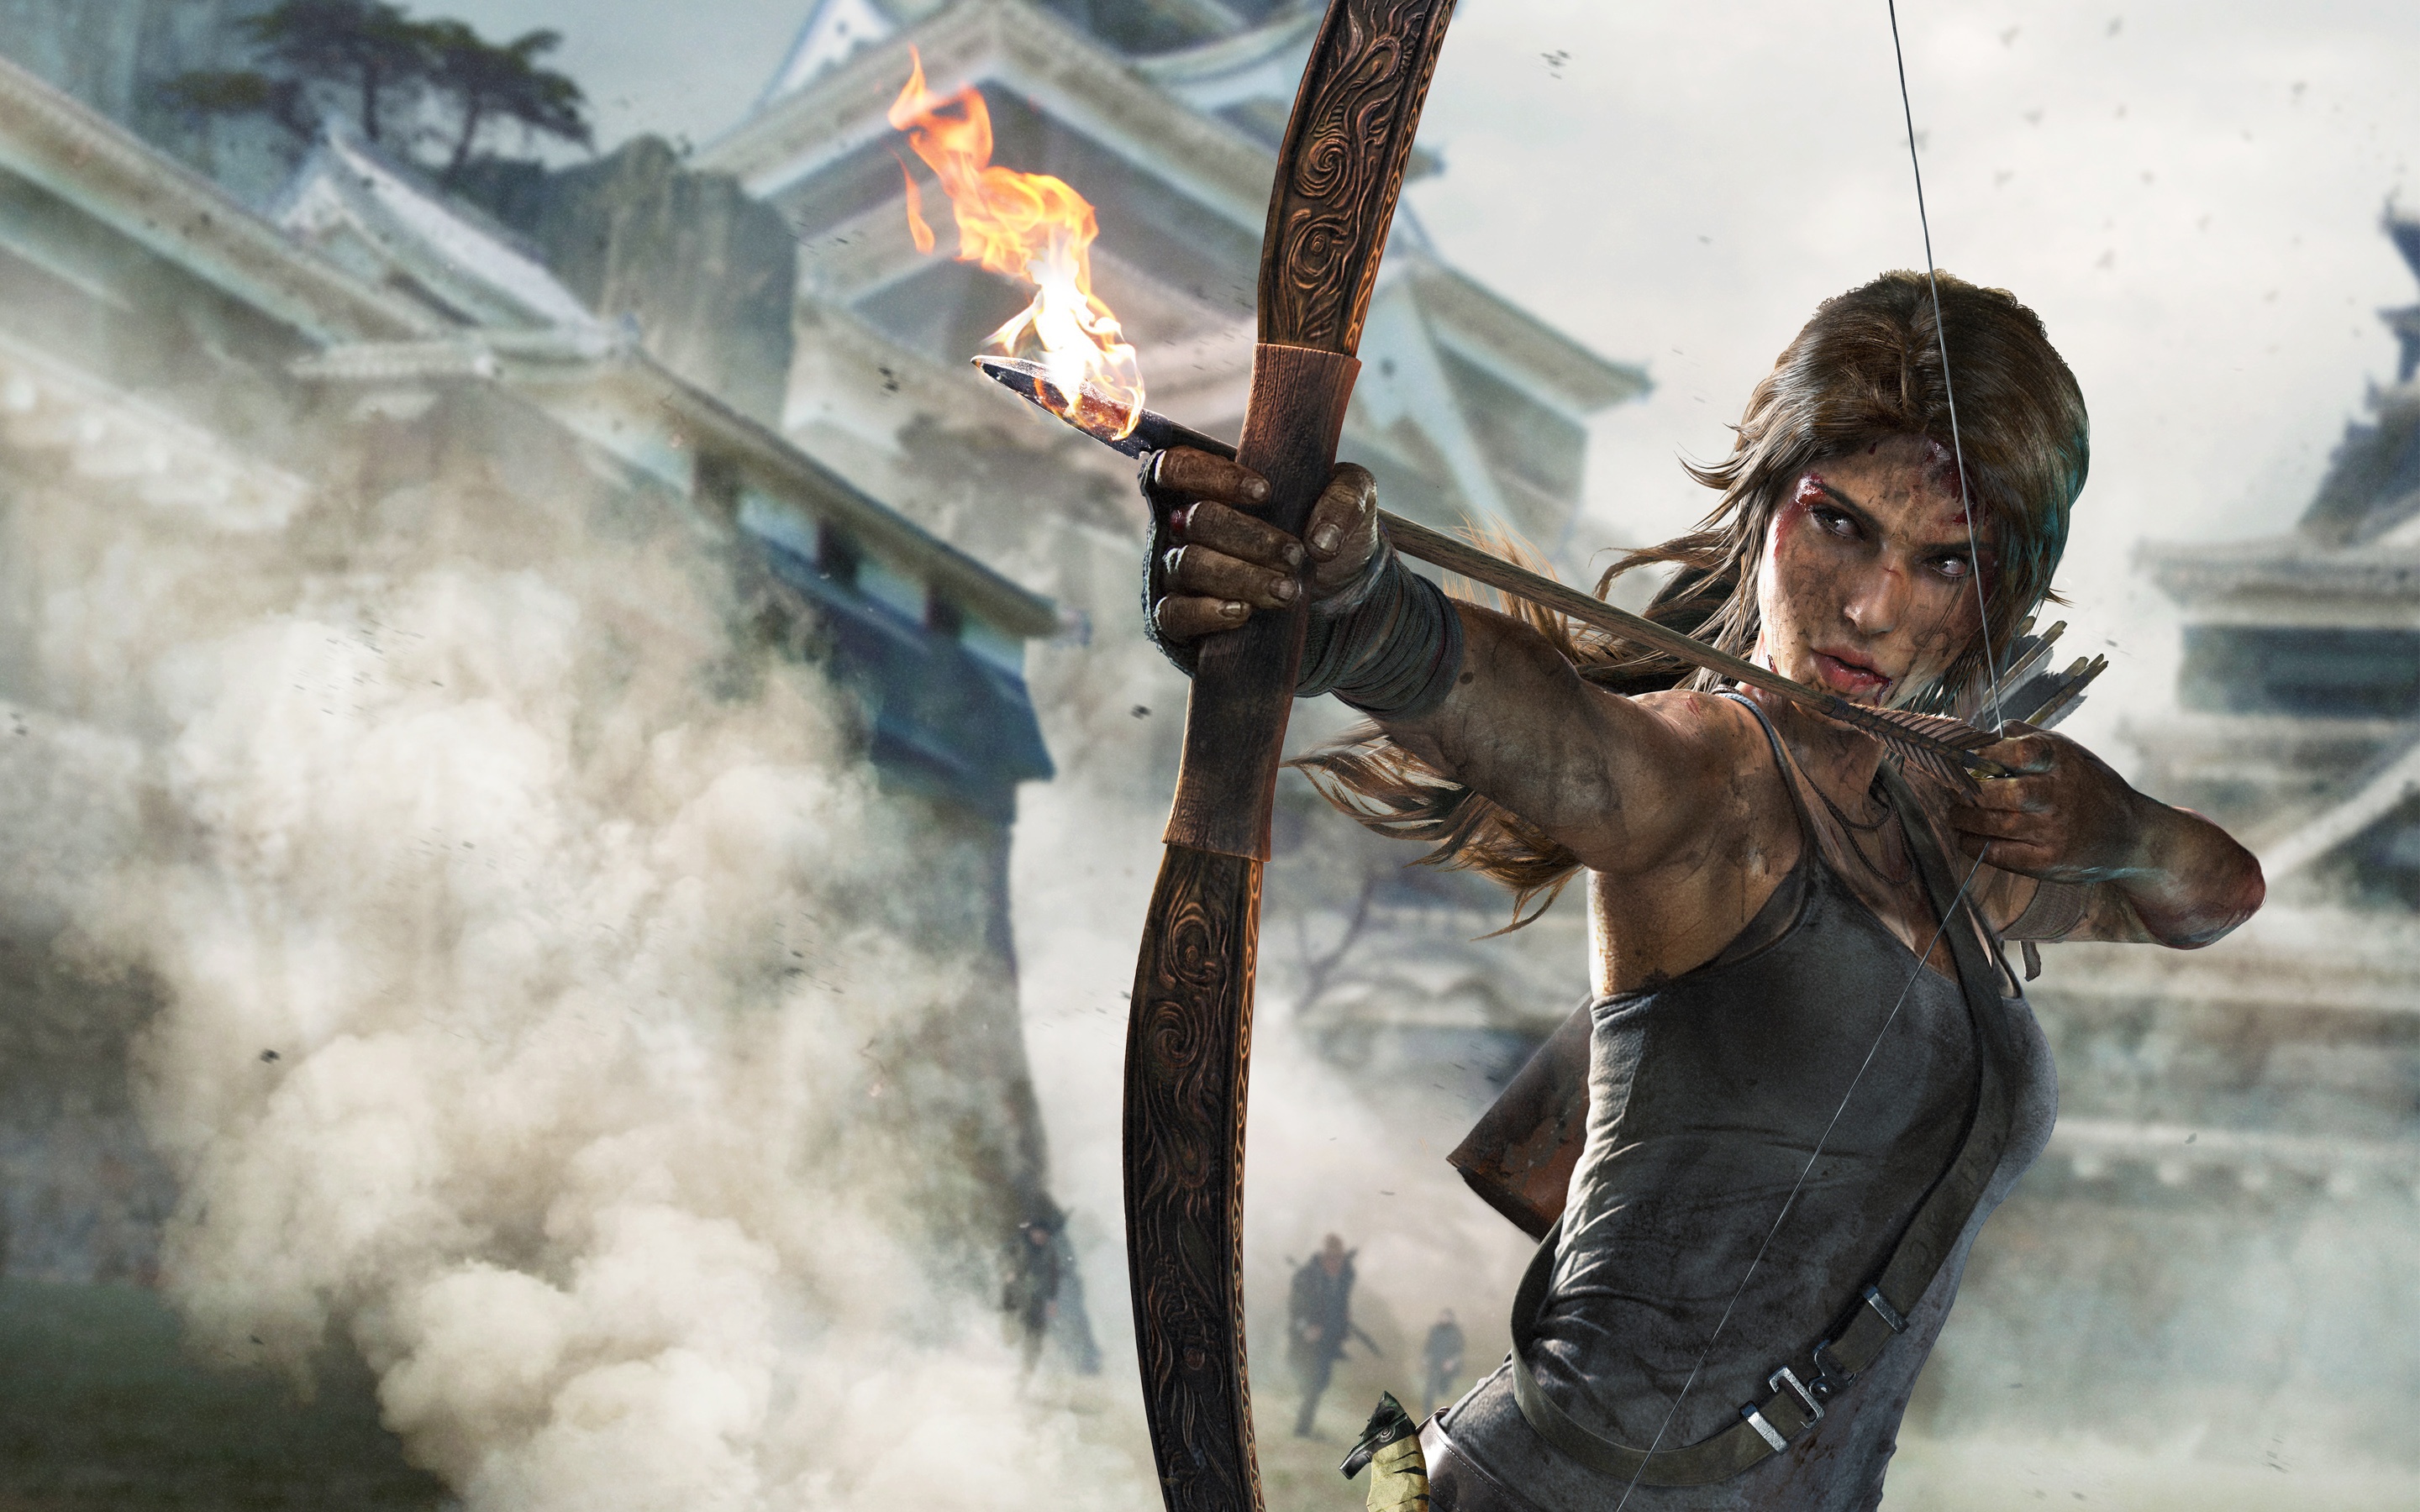 Tomb Raider Definitive Edition Wallpapers in jpg format for free